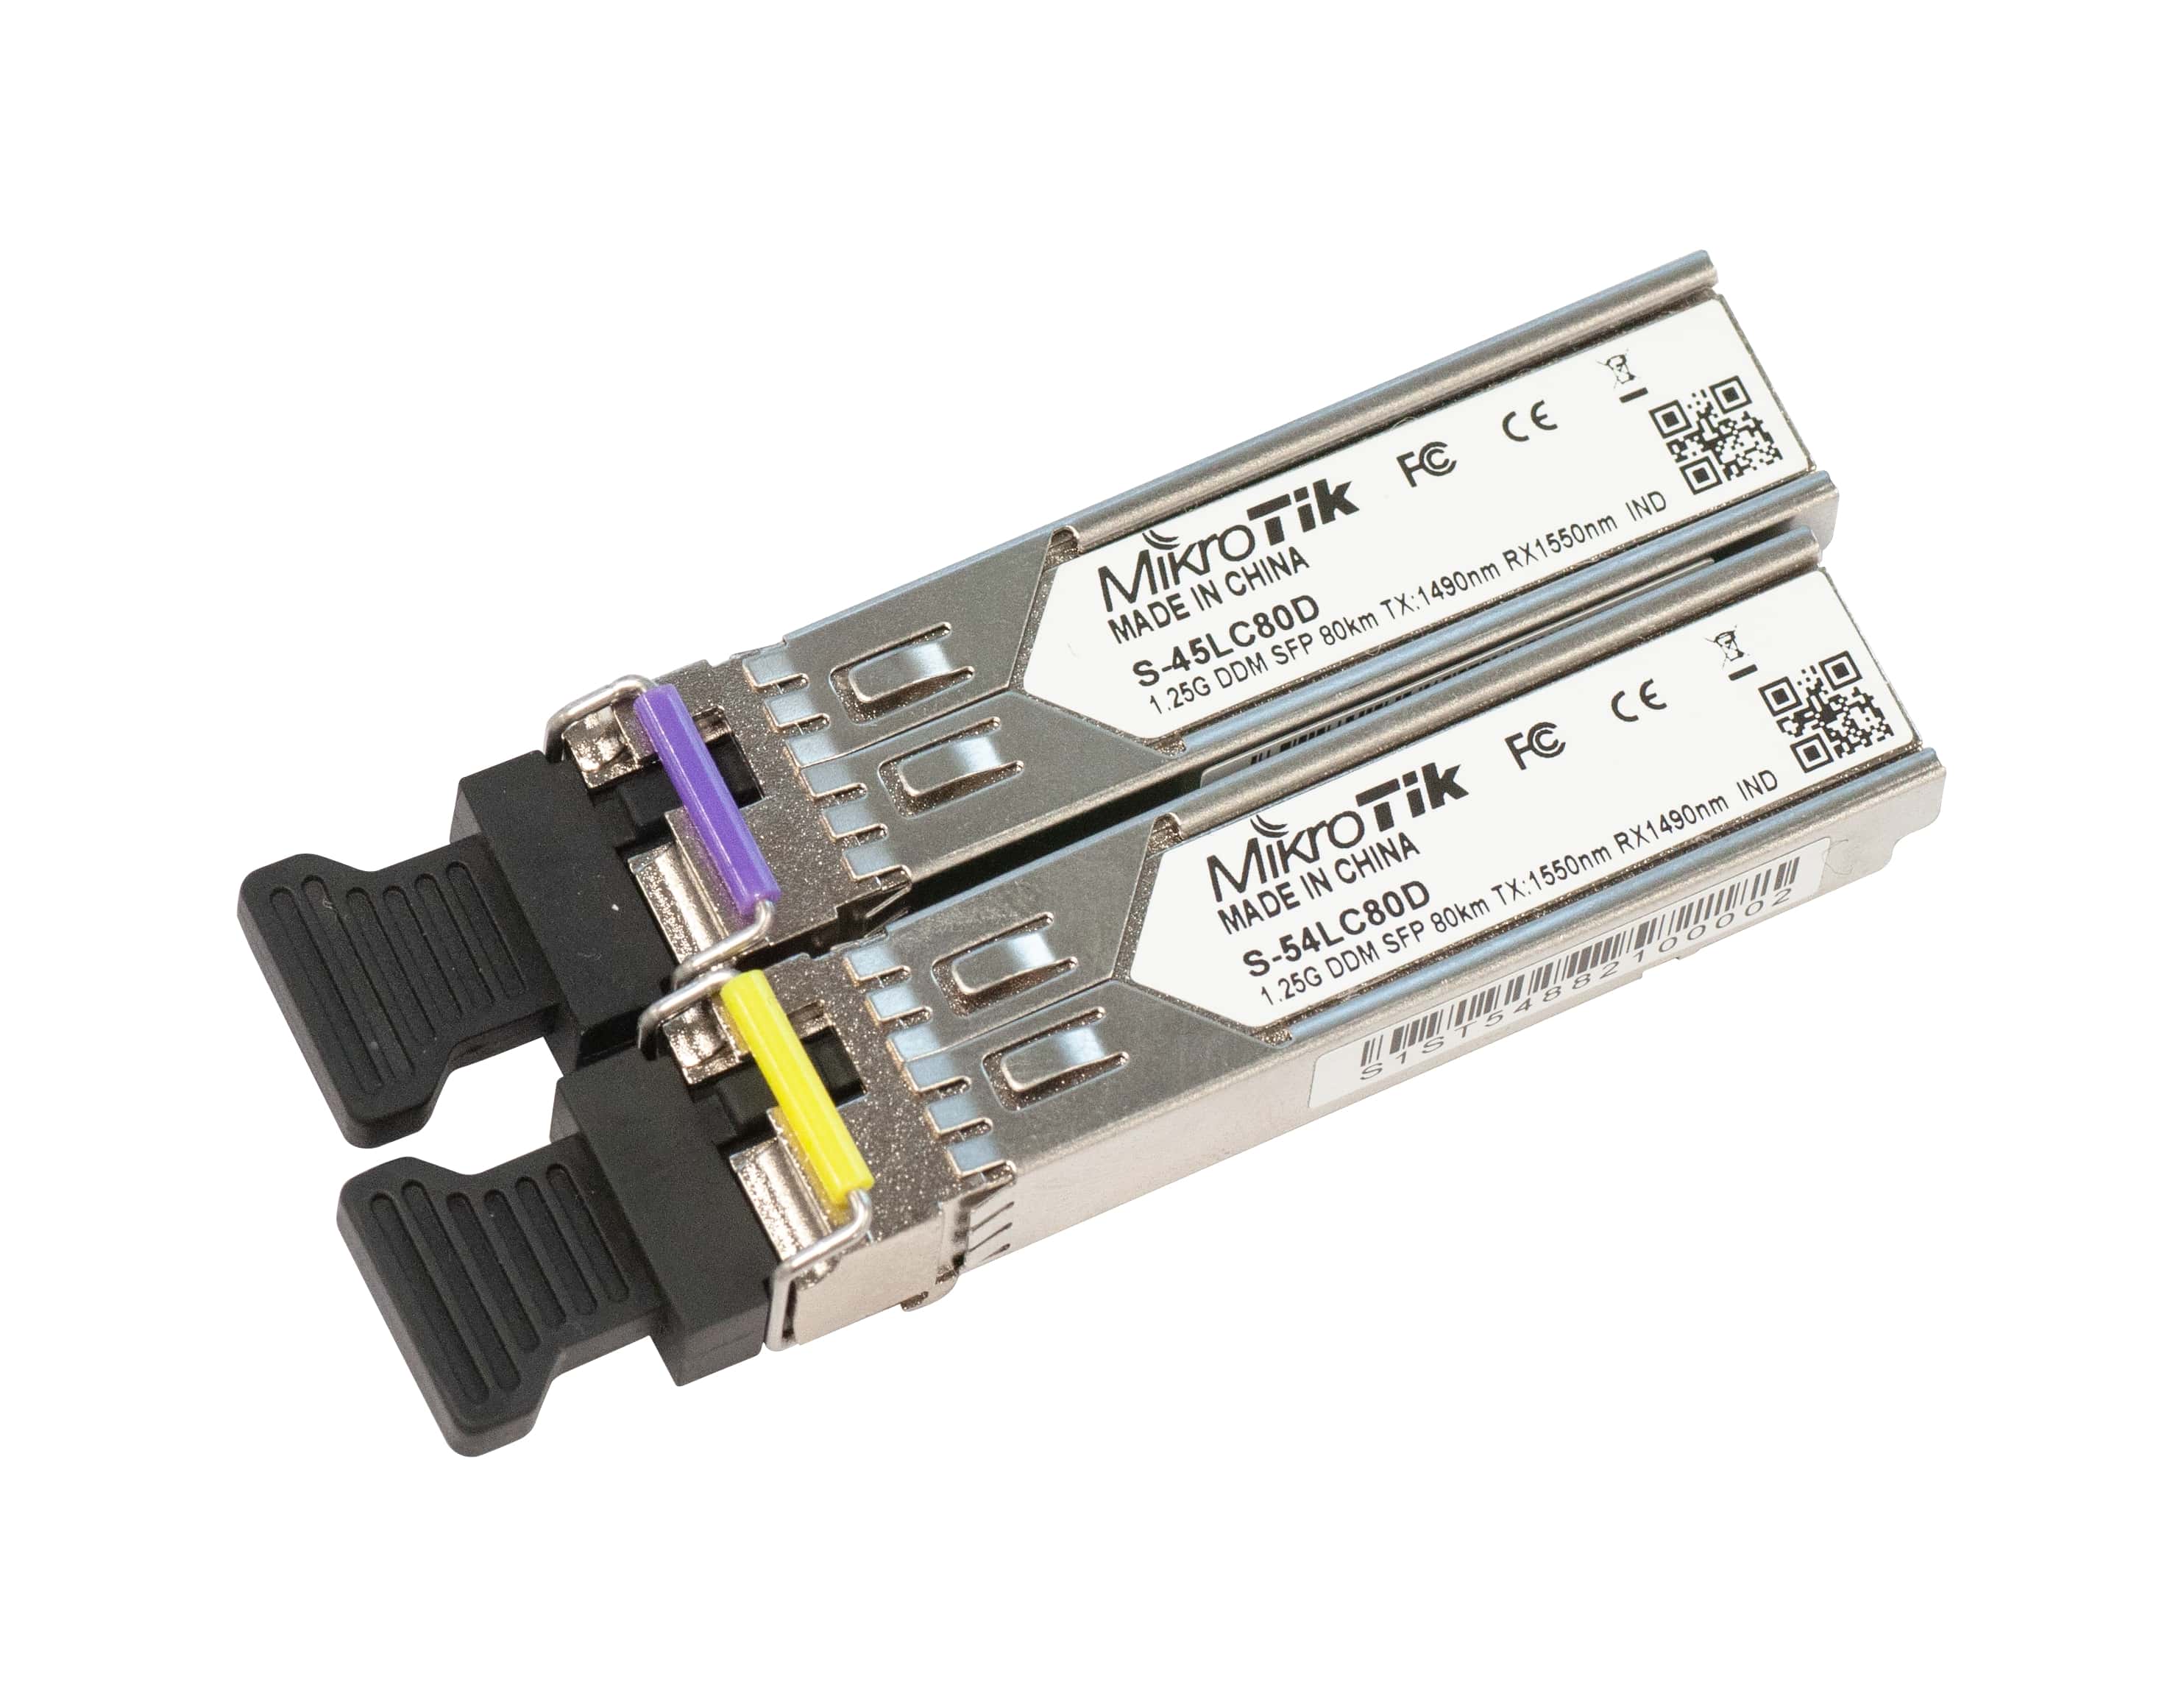 Pair of SFP 1.25G module for 80km links with Single LC-connectors